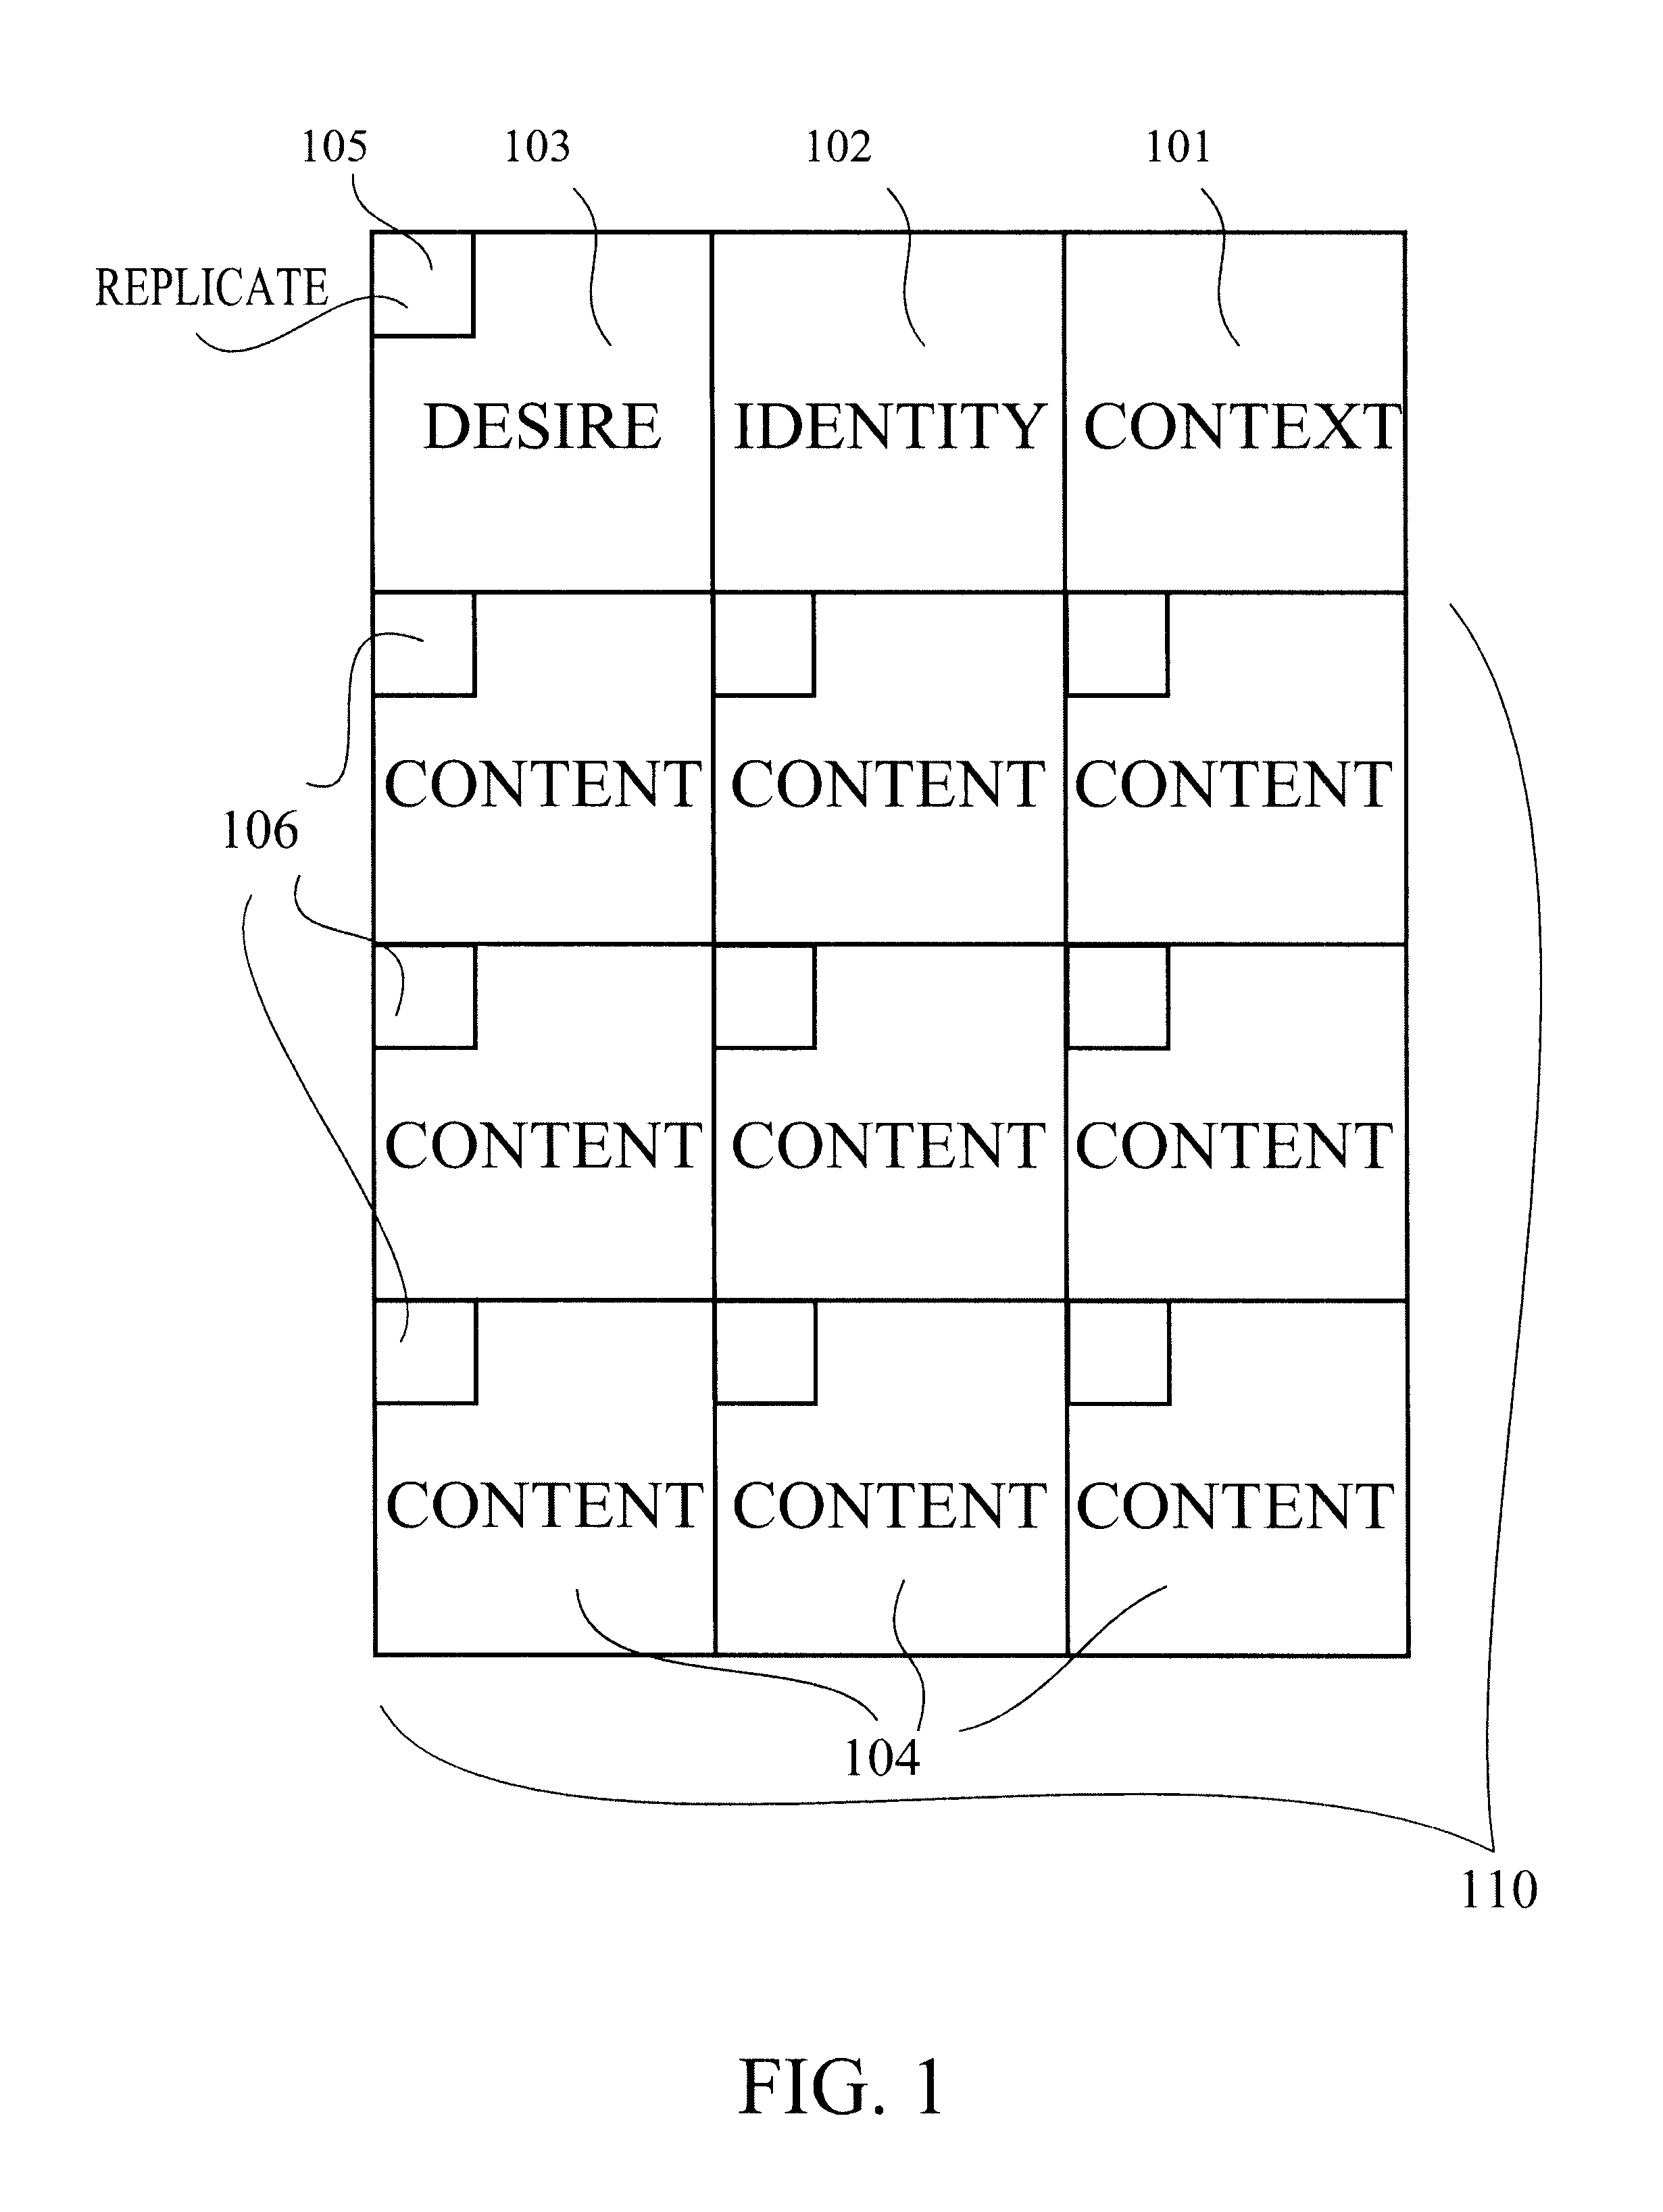 Method and device for finding, collecting and acting upon units of information